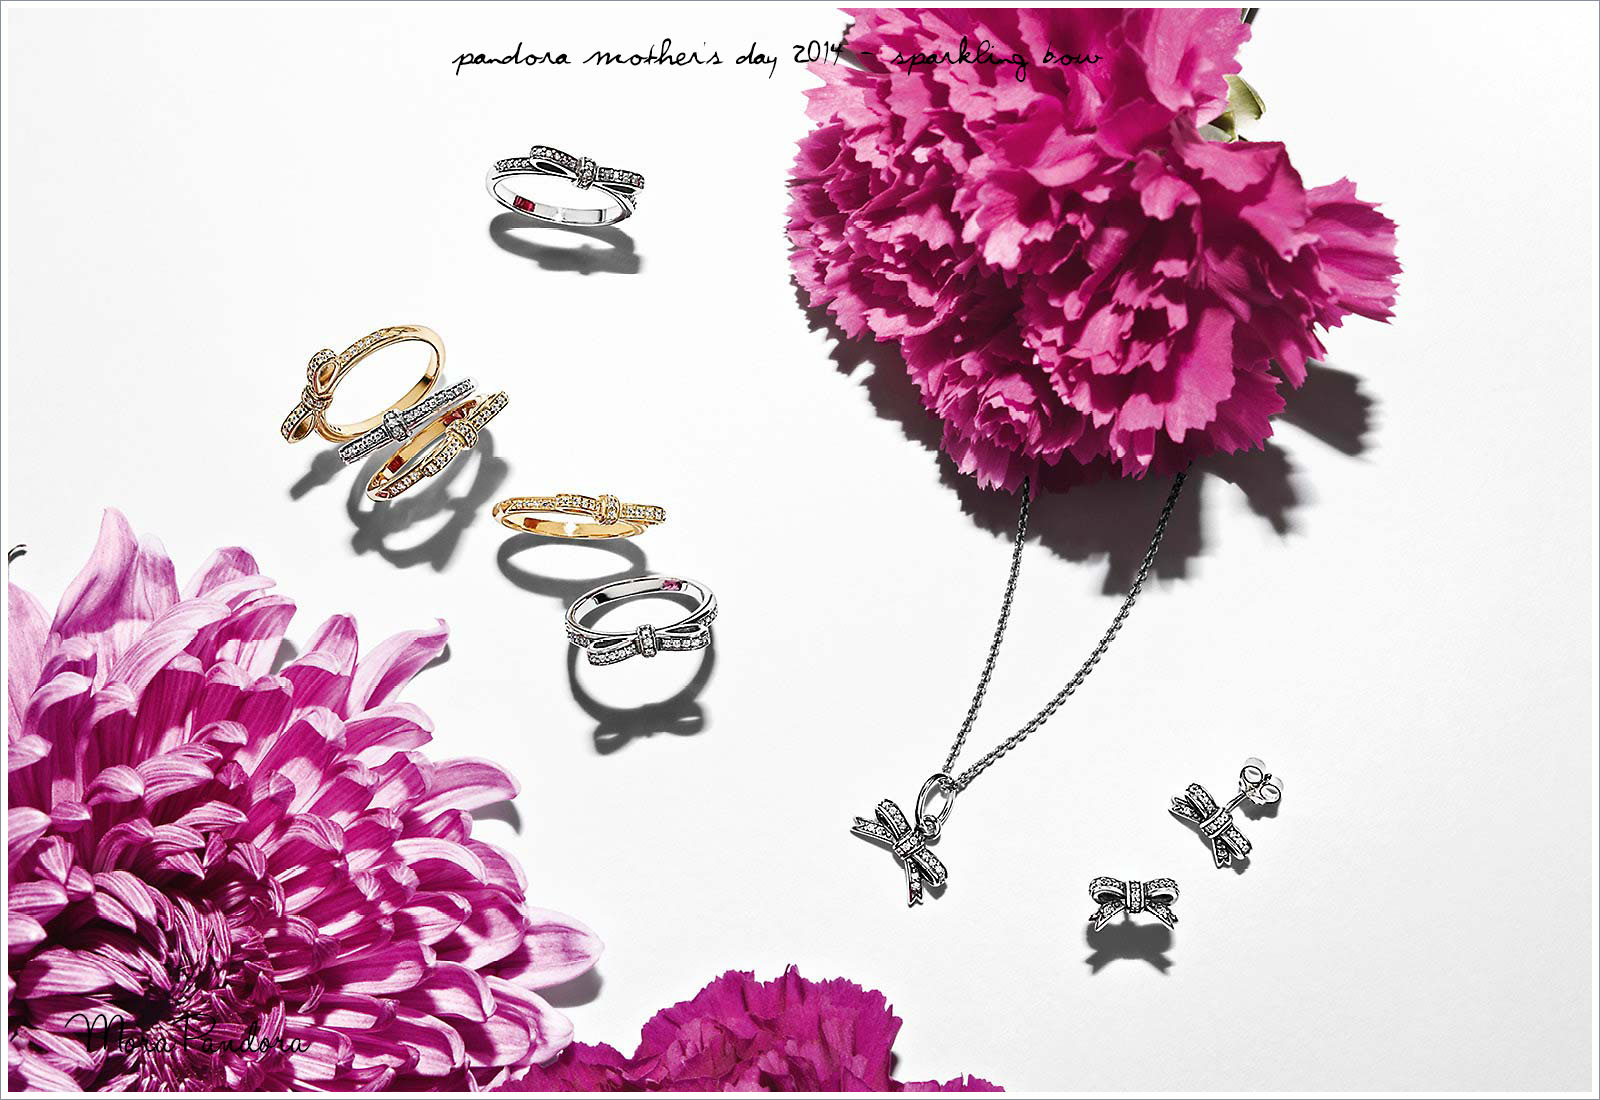 pandora mother's day lookbook 2014 sparkling bow